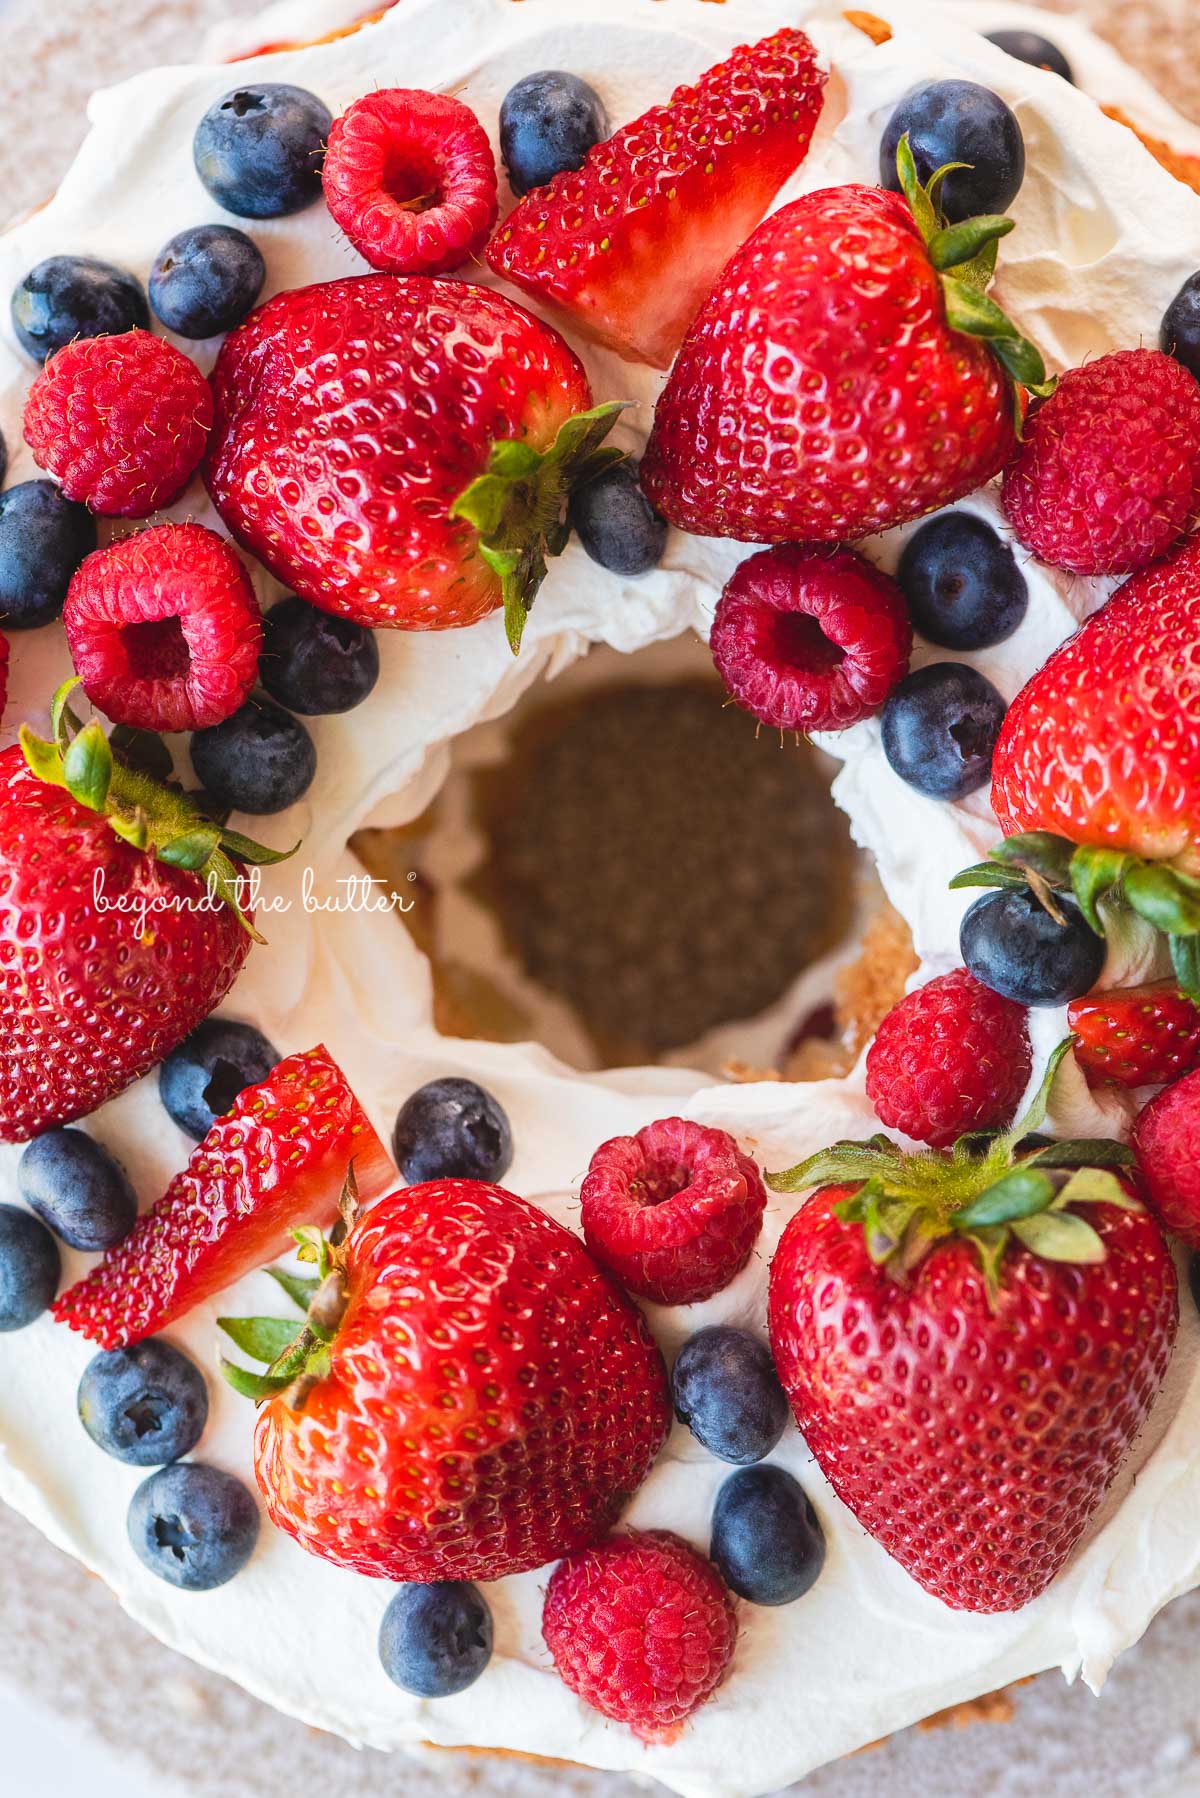 Homemade angel food cake with berries cloeup image | © Beyond the Butter®